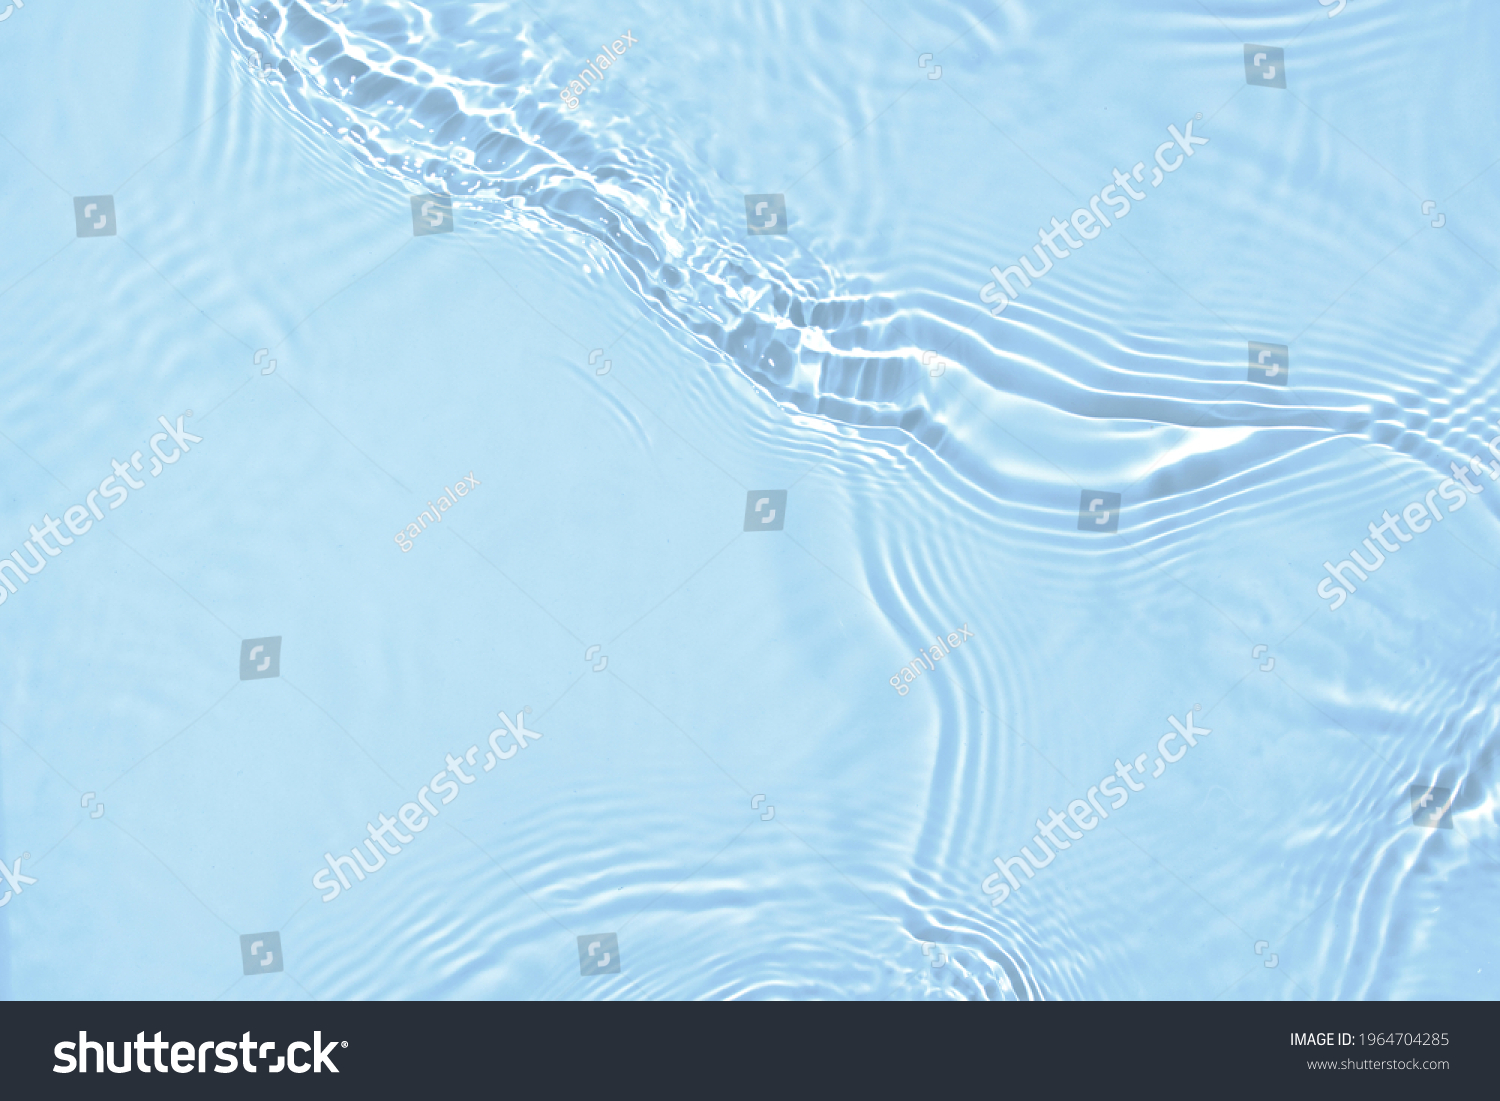 De-focused blurred transparent blue colored clear calm water surface texture with splashes and bubbles. Trendy abstract nature background. Water waves in sunlight with copy space. #1964704285